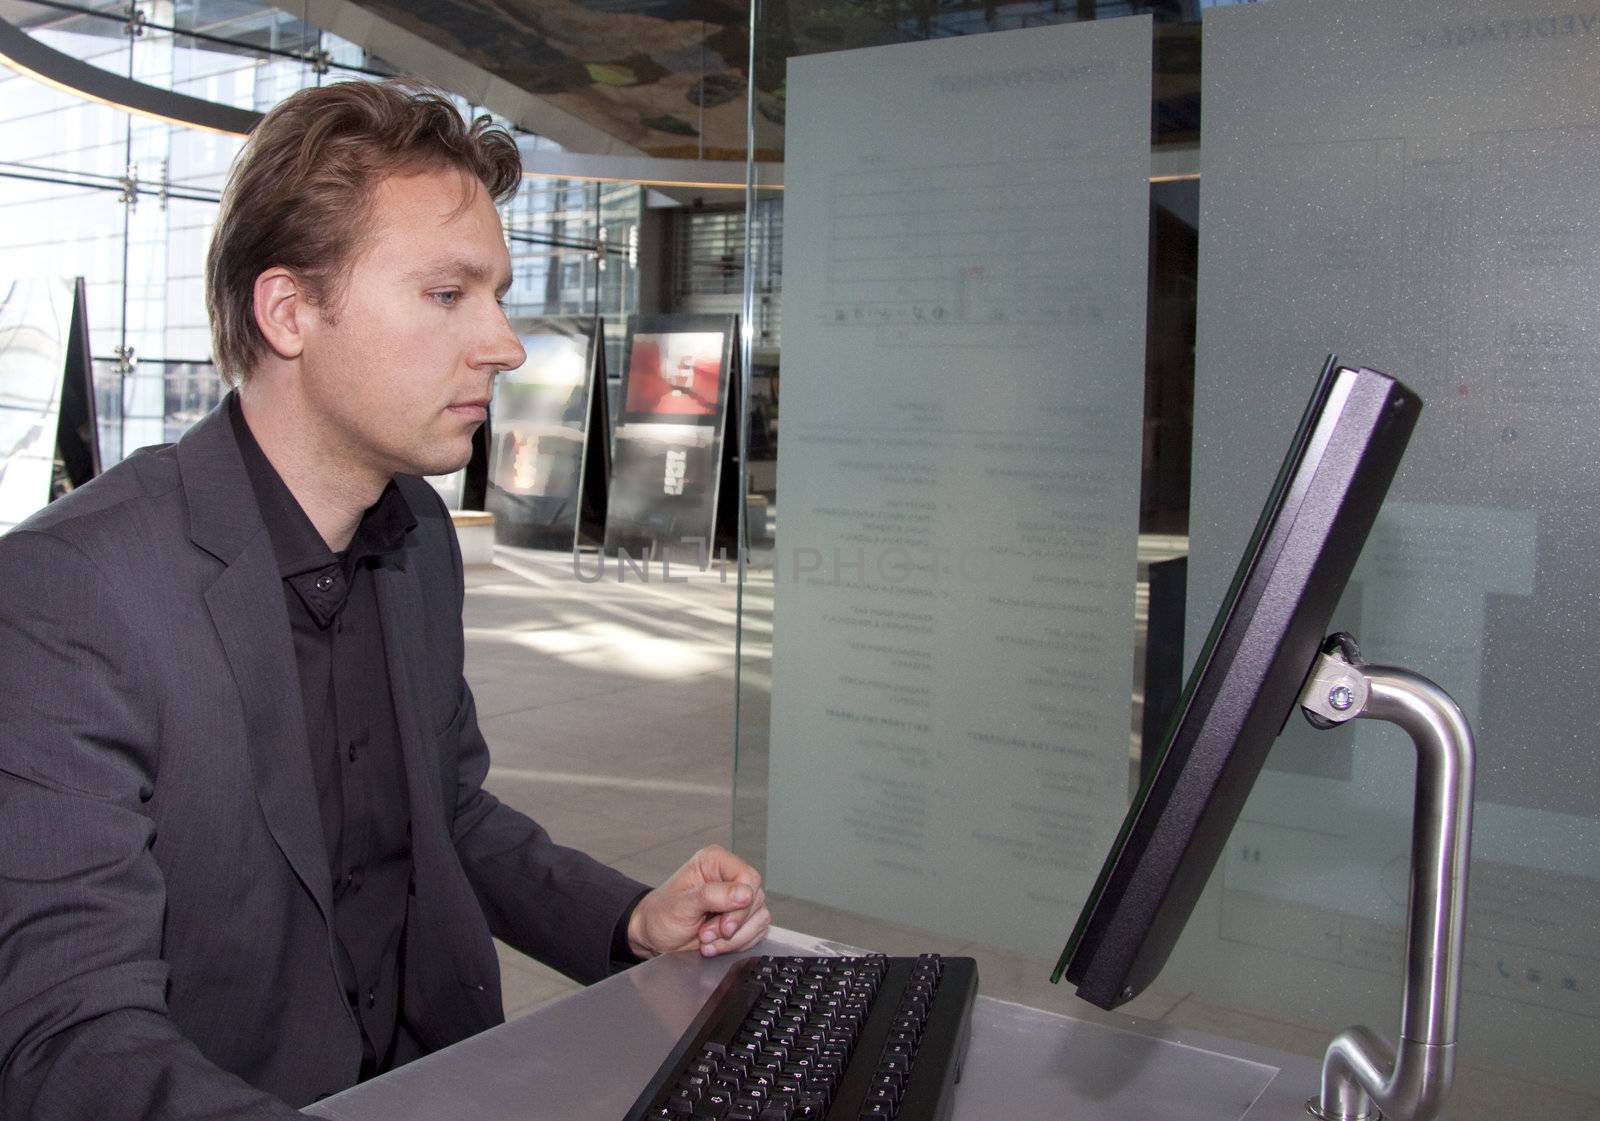 A young executive is standing and using the computer in the in a business lounge